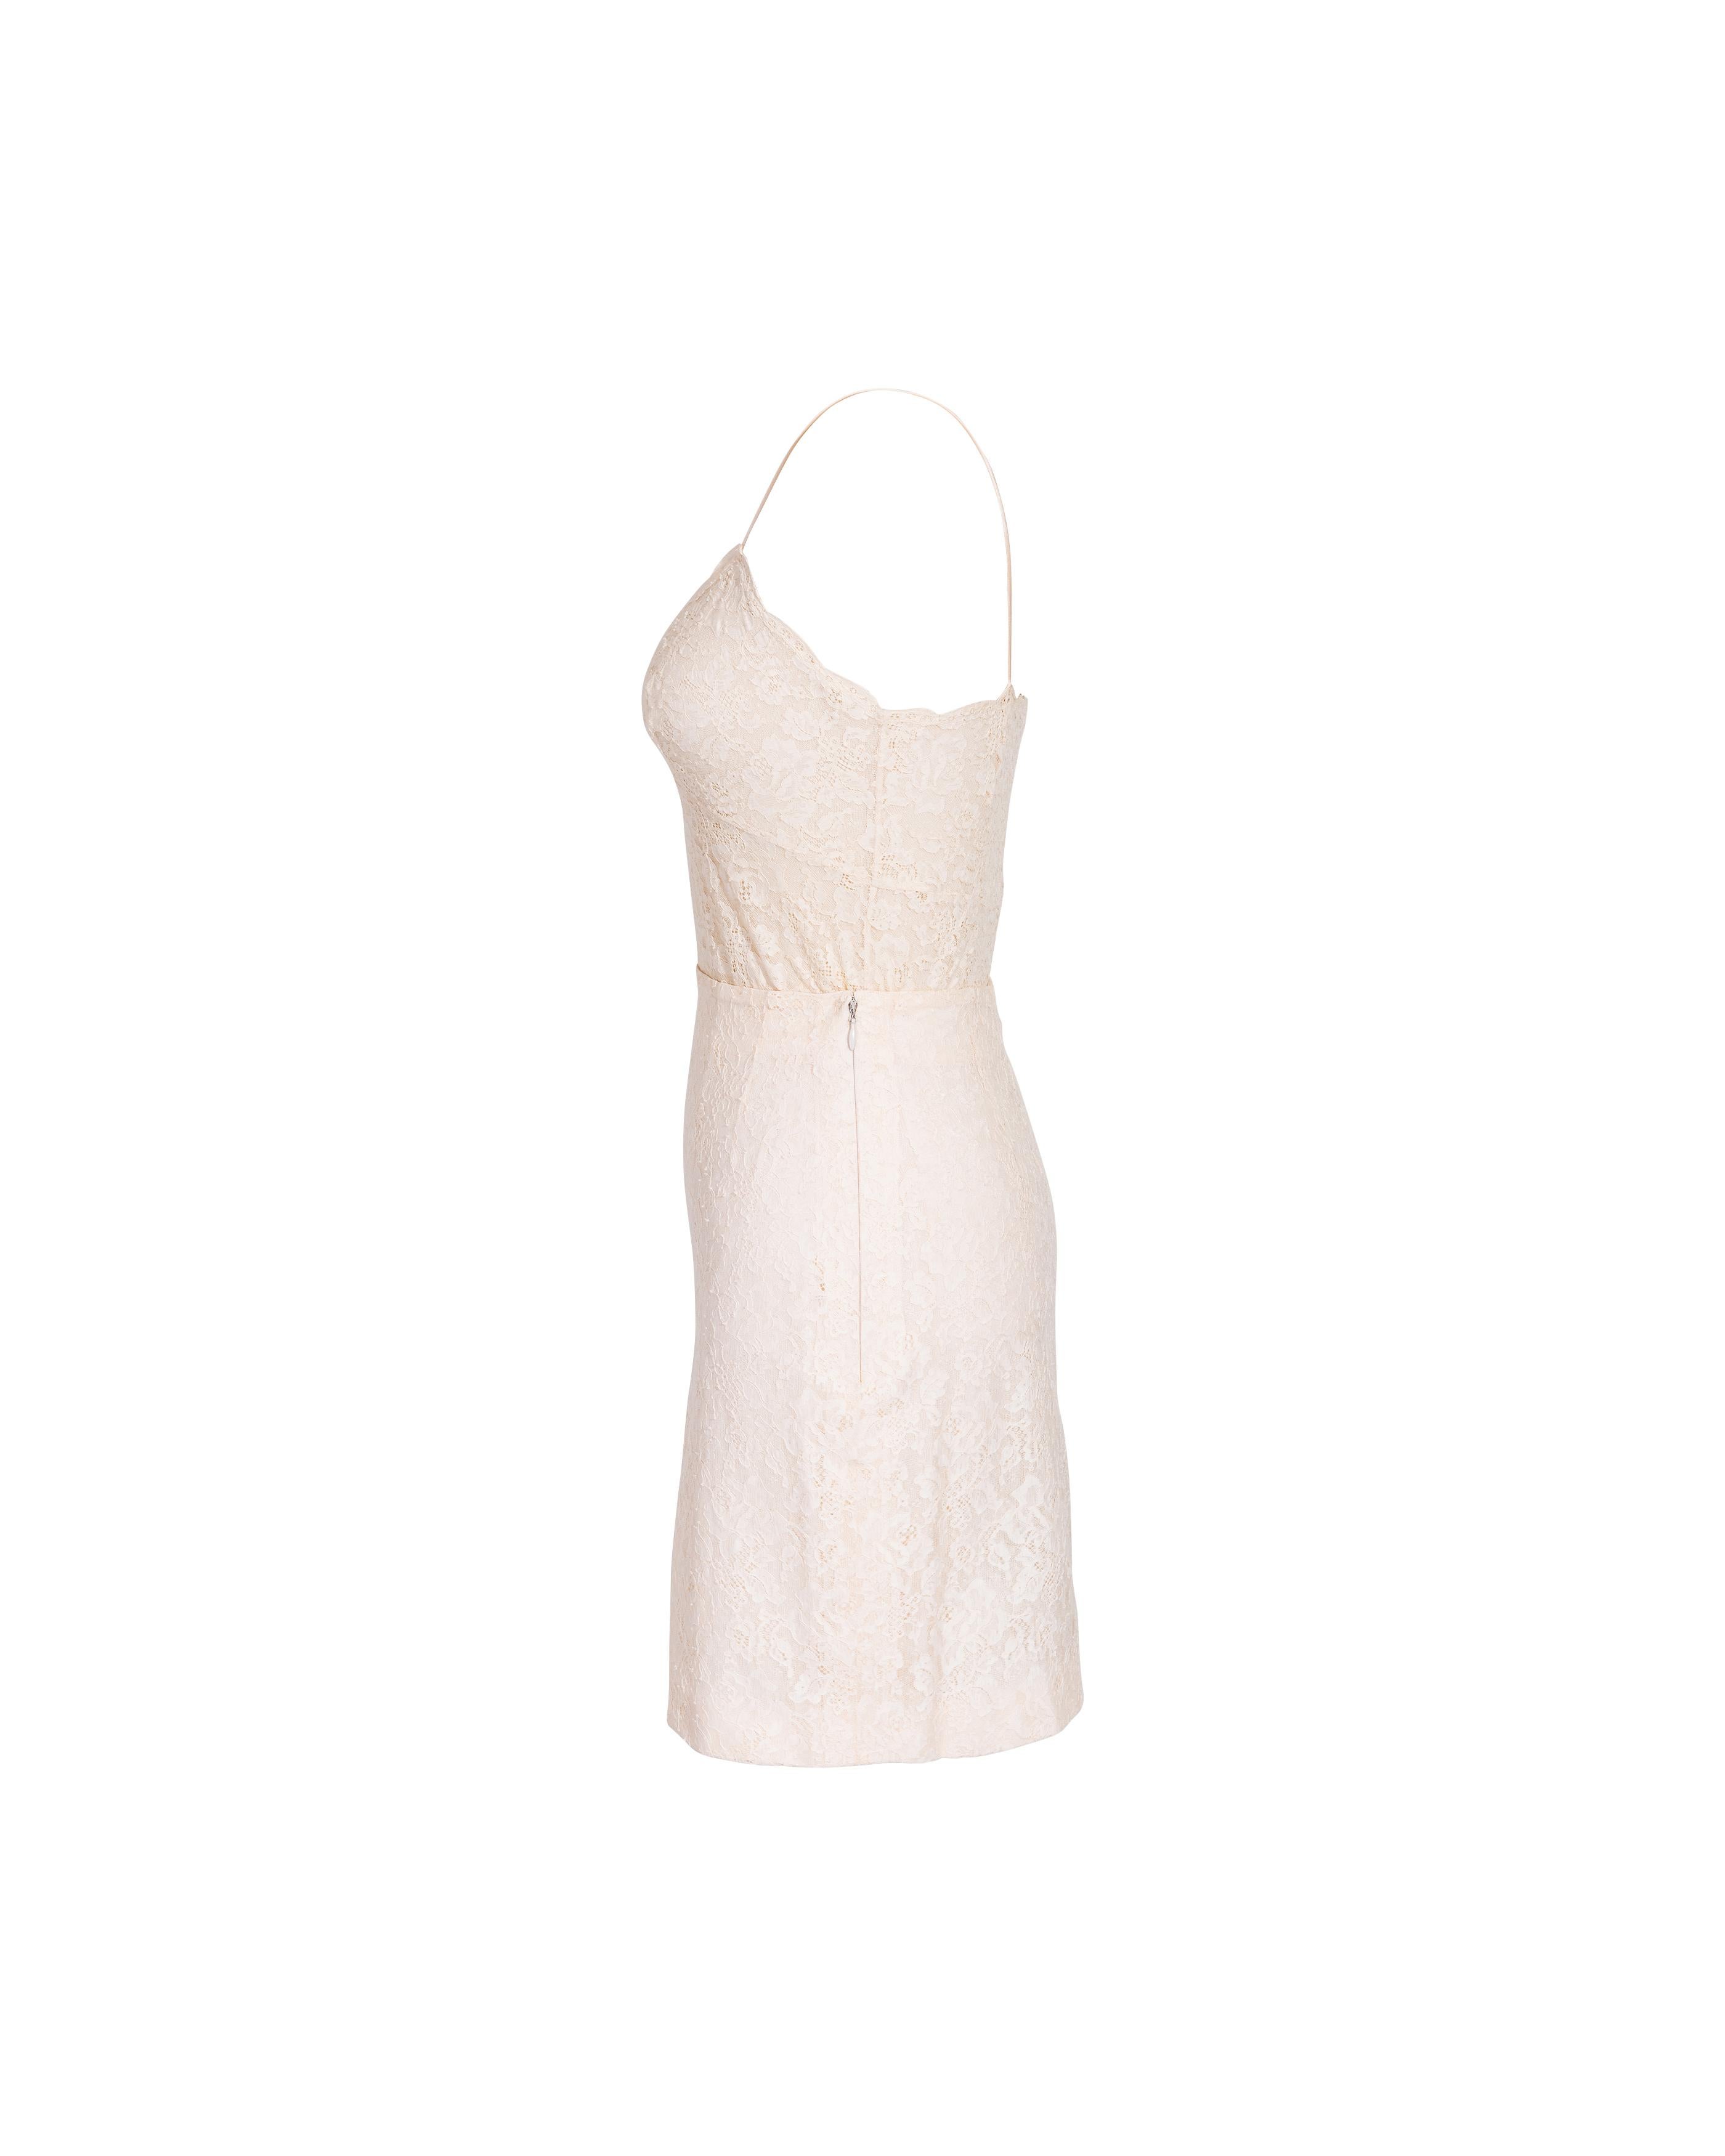 S/S 1998 Christian Dior by John Galliano cream lace mini skirt set. Spaghetti strap fully lace tank top with double bow details at chest pairs perfectly with lace mini skirt with thigh slit. Note that straps of top have additional fabric allotment